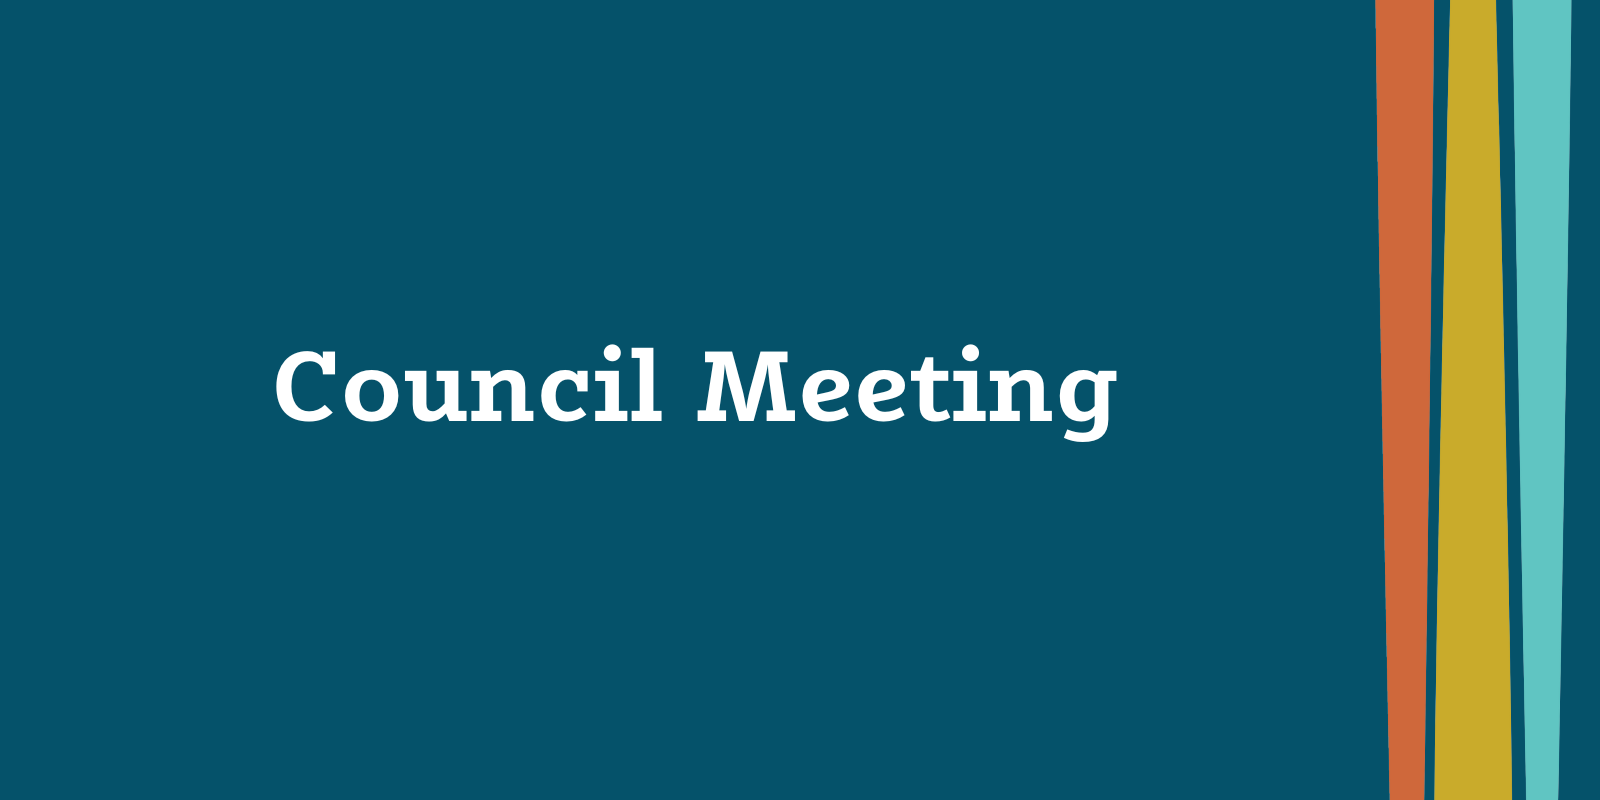 Council Meeting banner image